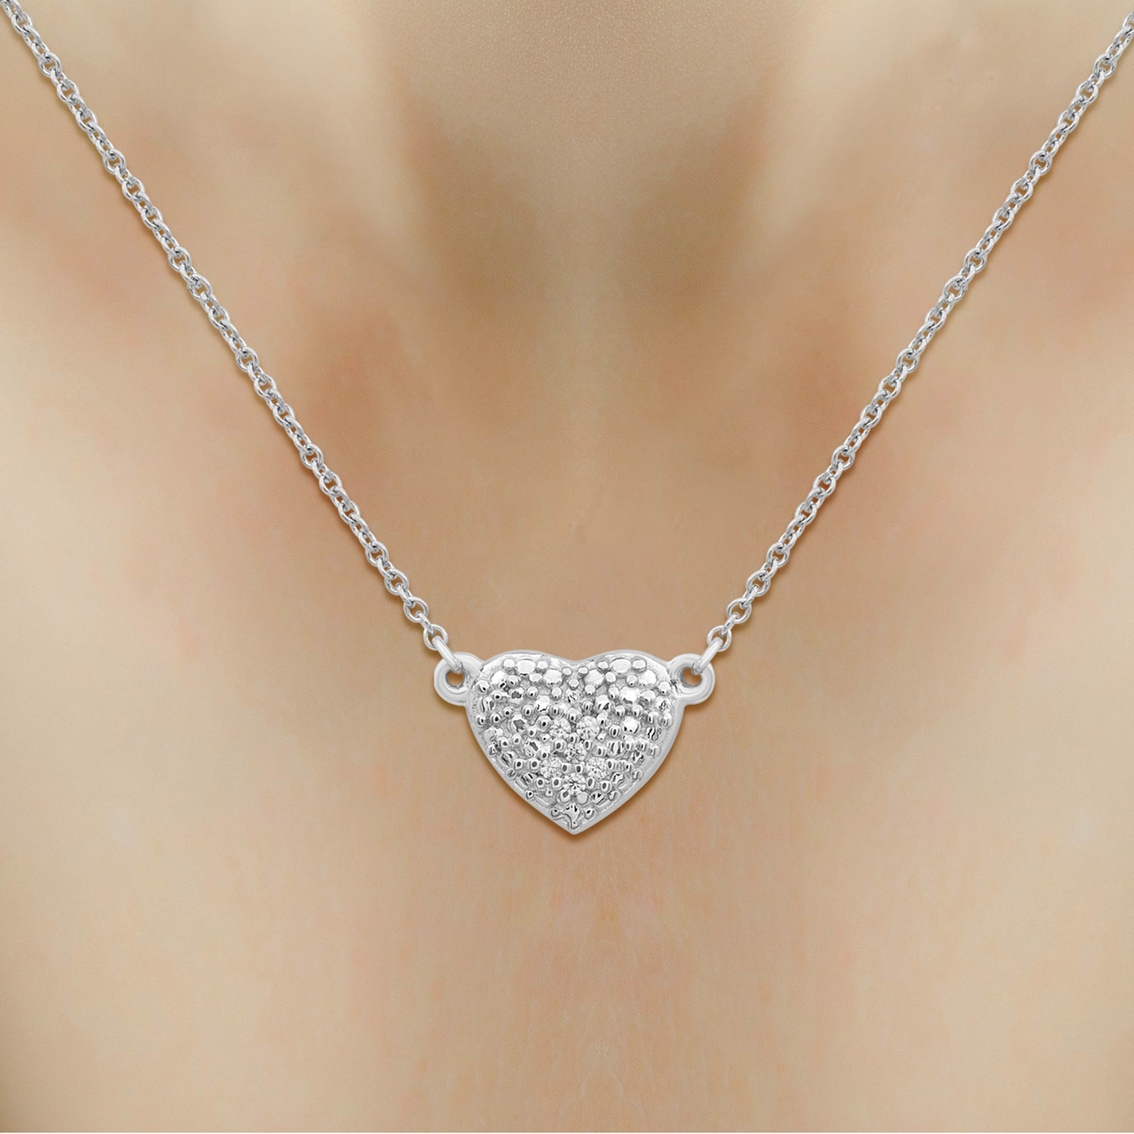 She Shines Sterling Silver Heart Necklace Set - Image 4 of 5